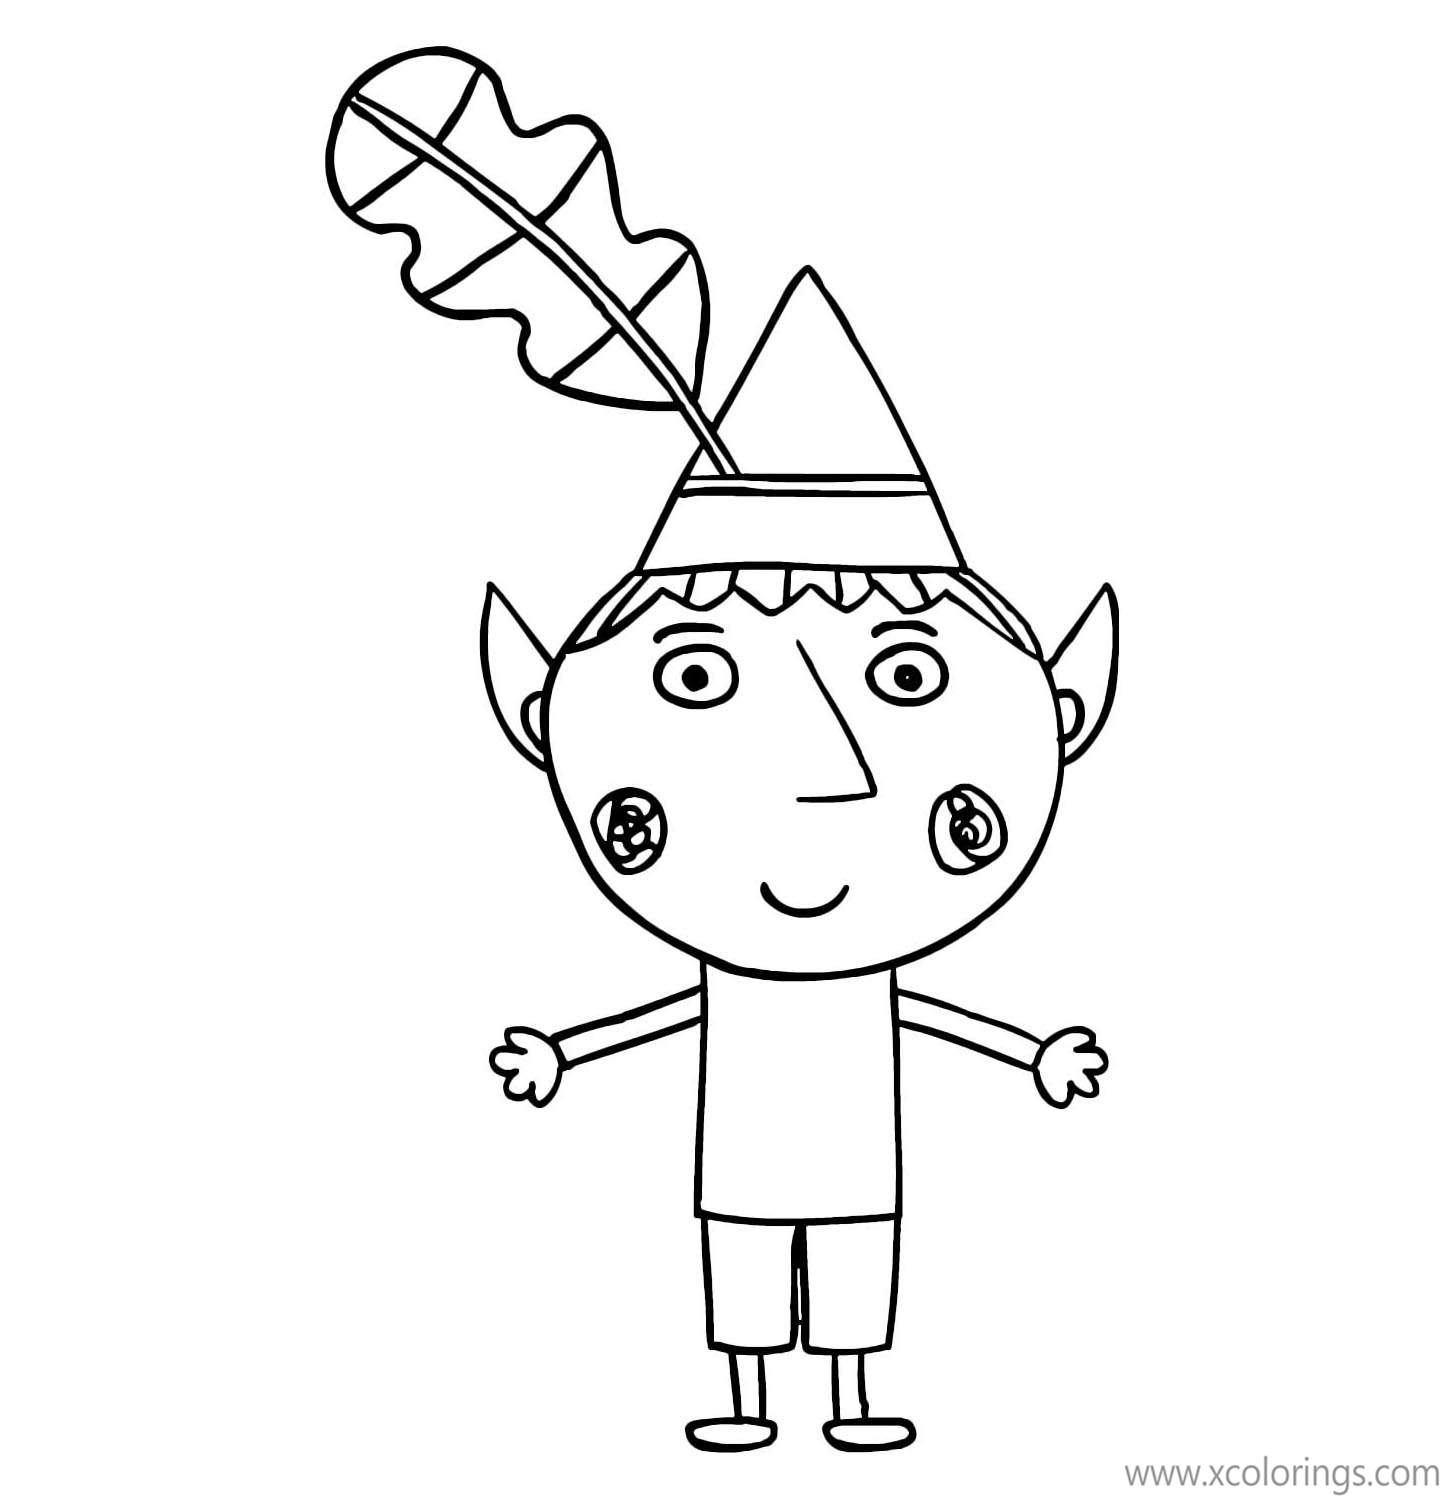 Ben And Holly Coloring Pages Ben is a Elf - XColorings.com